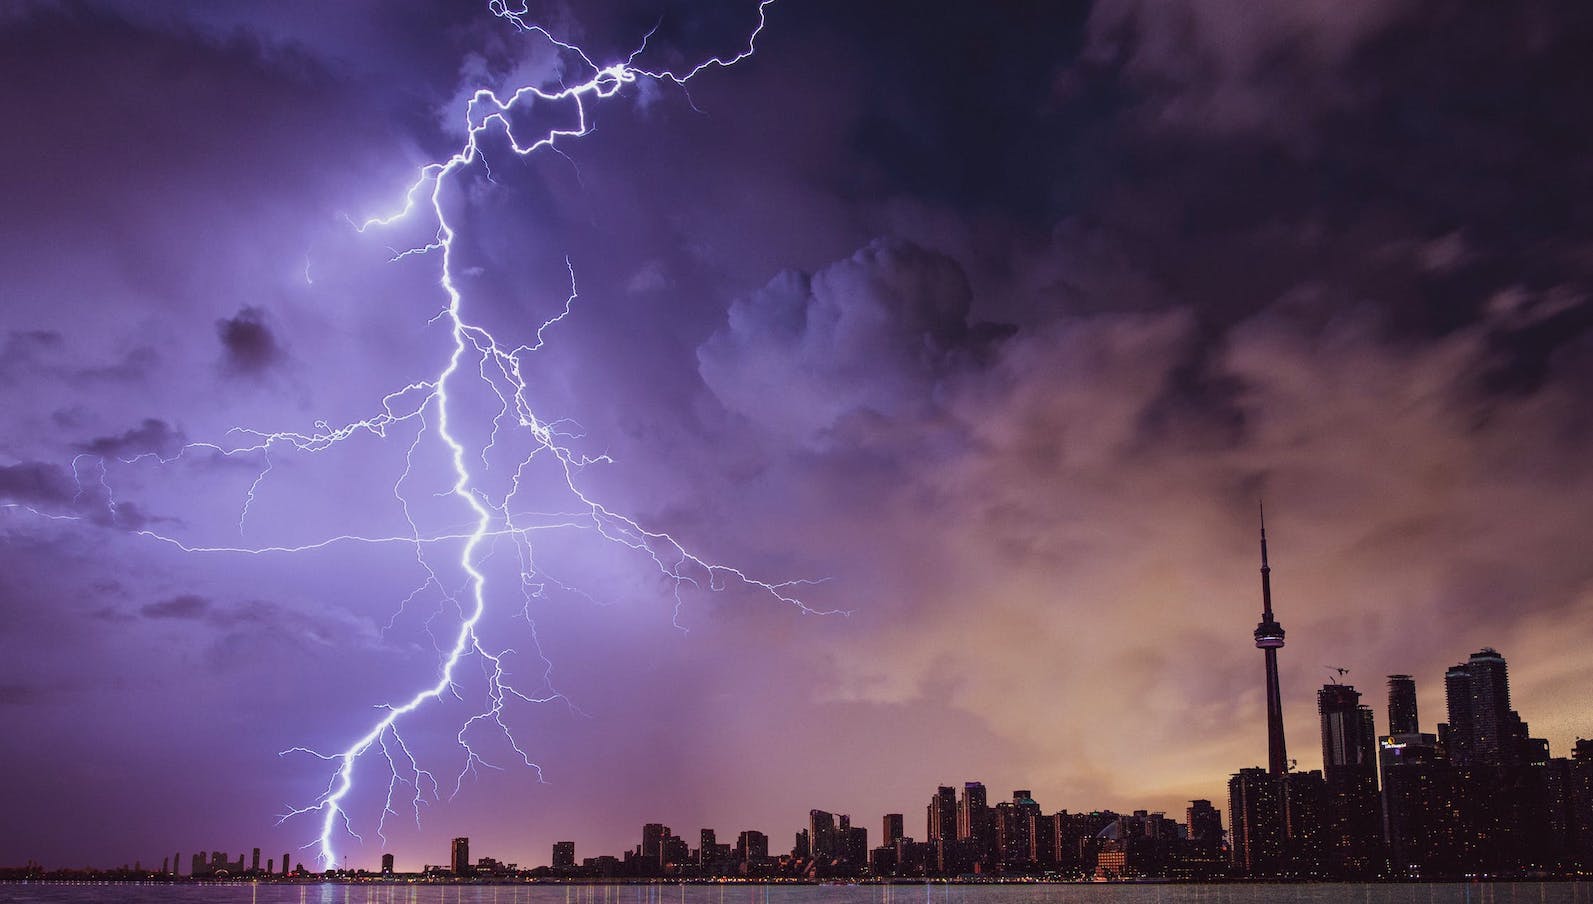 A dark city skyline with clouds overhead and a large bolt of lighting against a purple sky